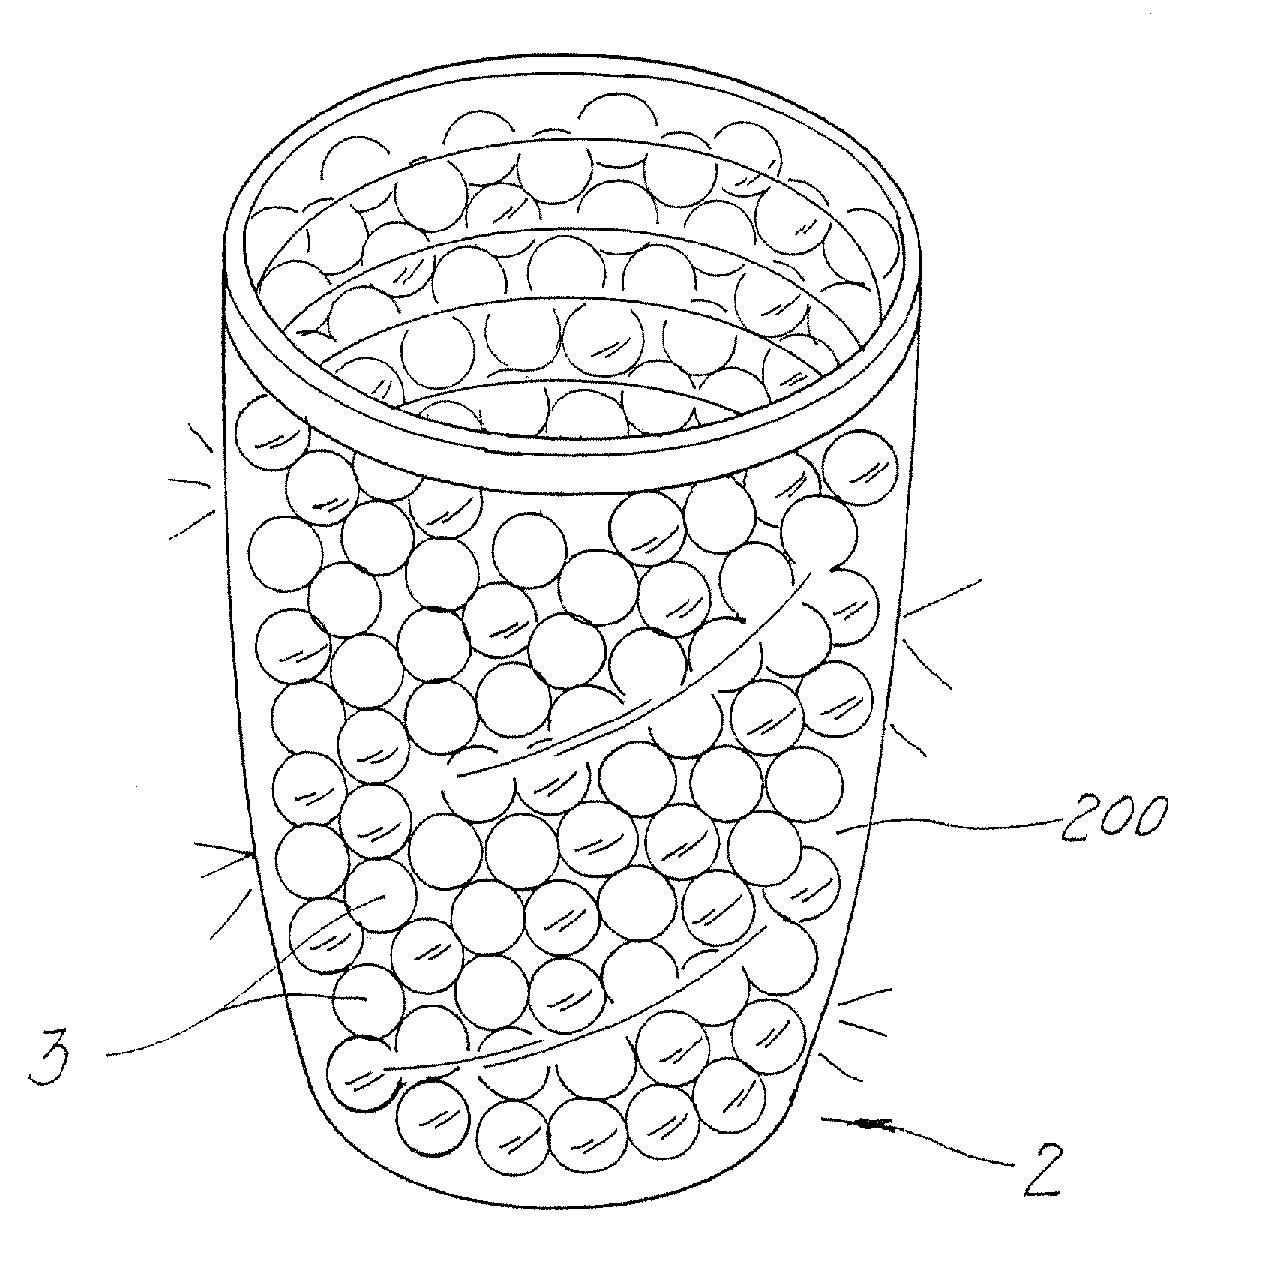 Structure of crystal-bead-contained glass